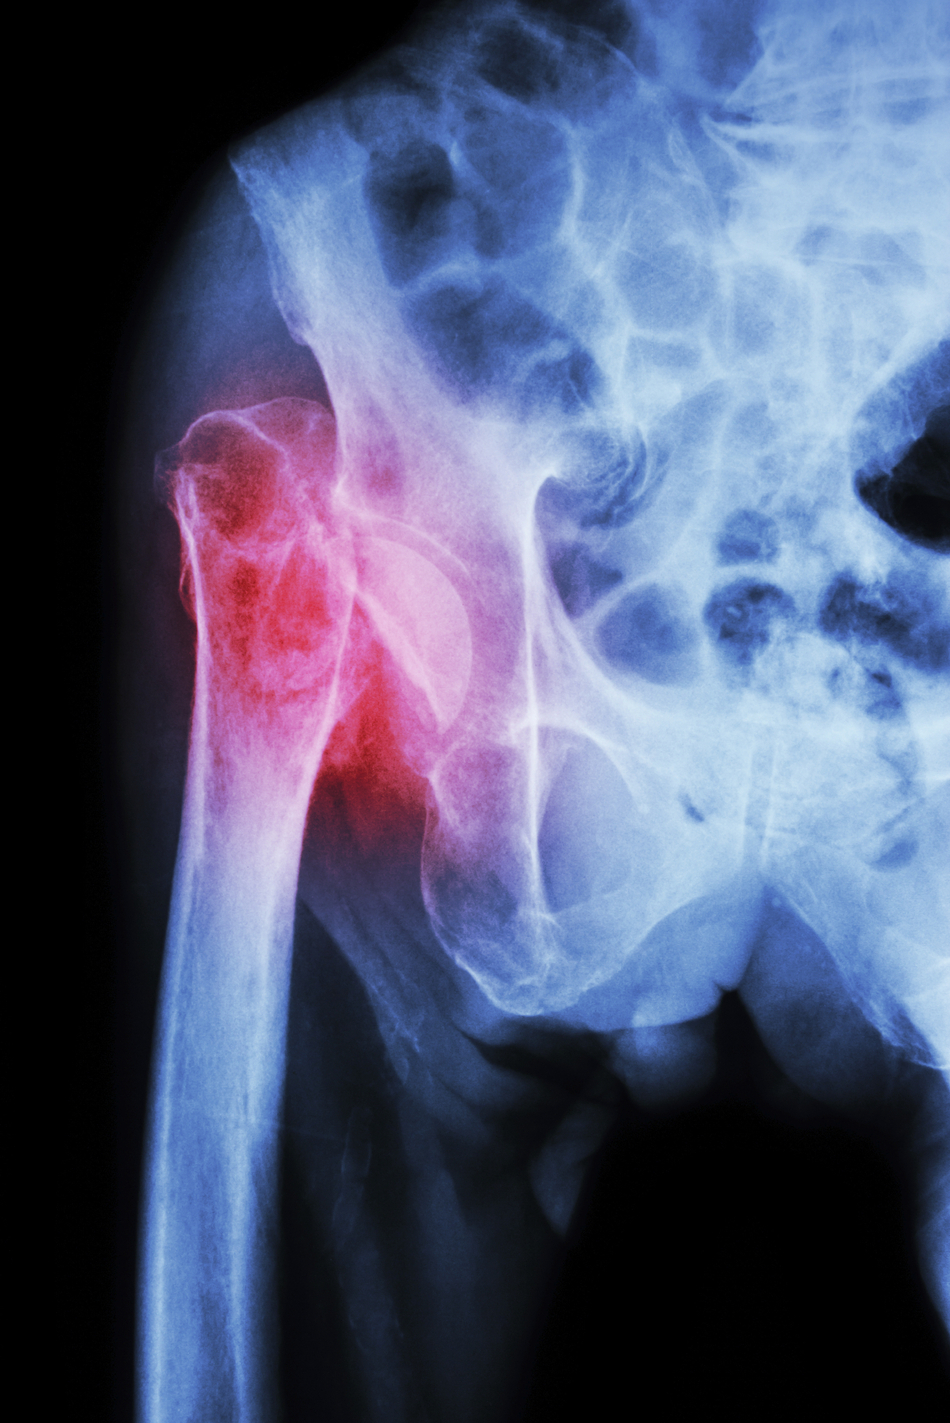 You Can’t Cast It: Pelvic Fracture Treatment